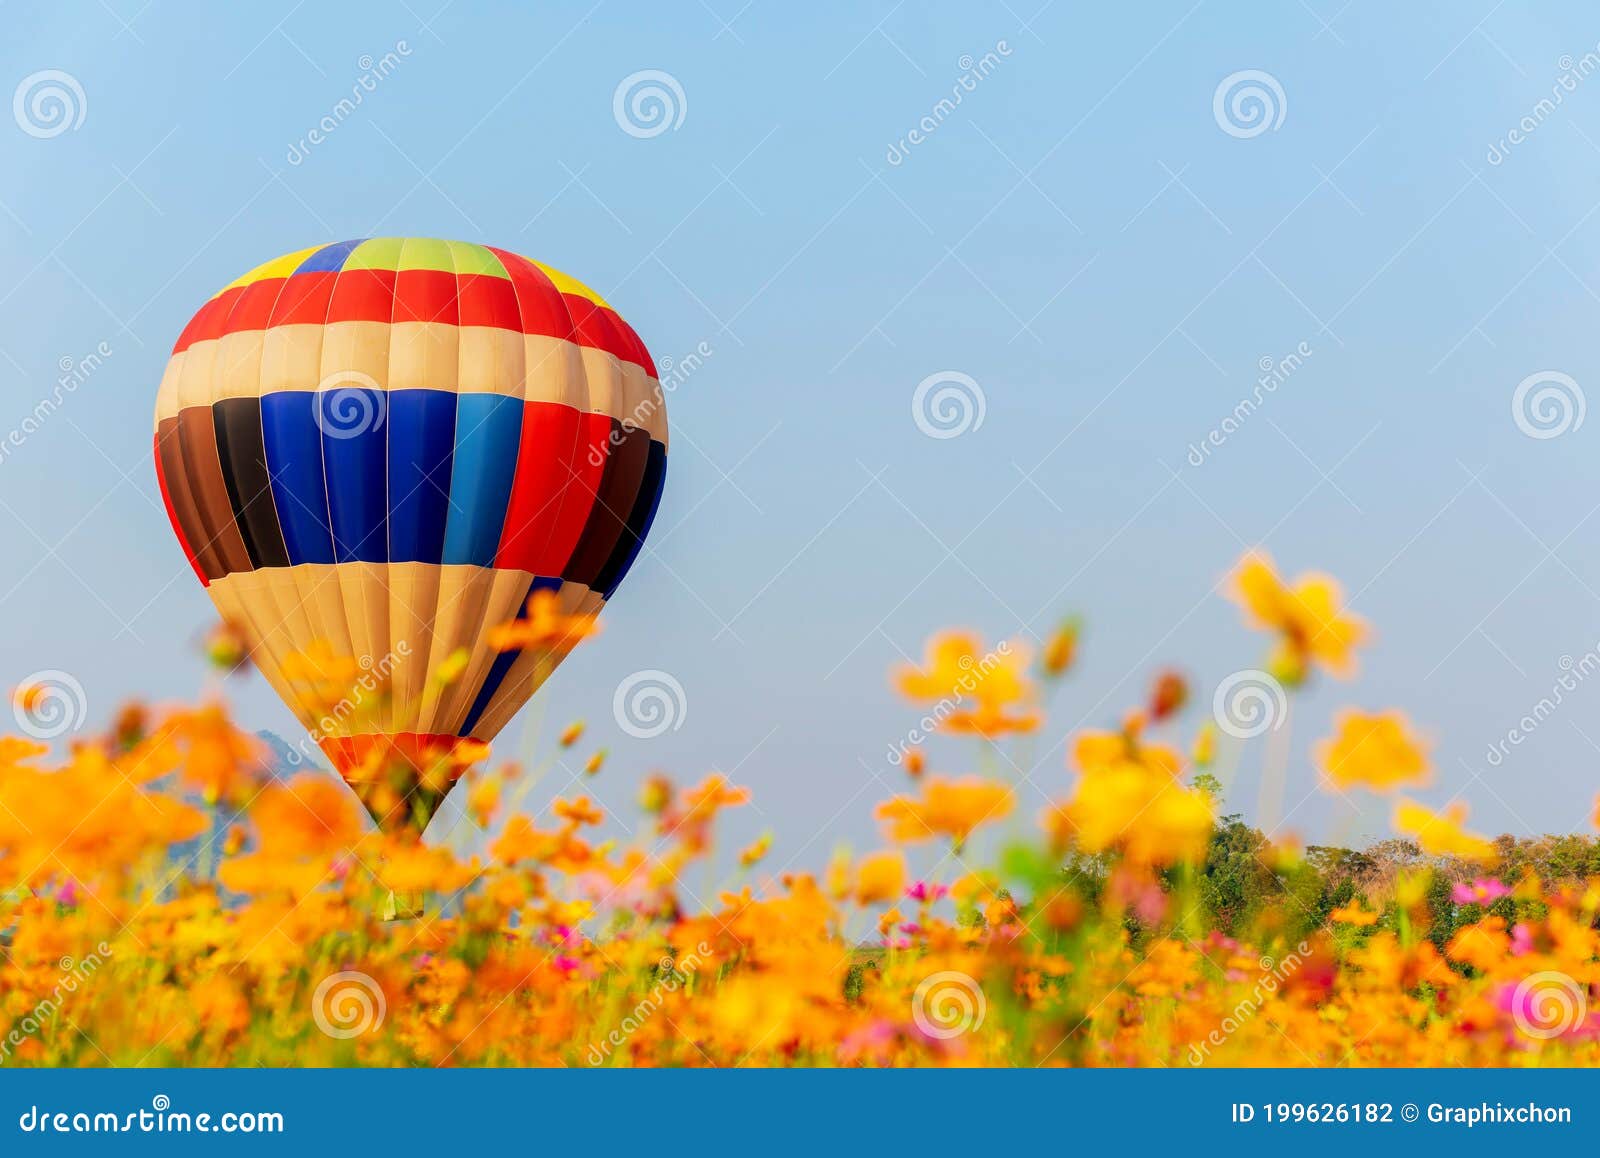 Colorful Hot Air Balloon Flying at the Natural Park and Garden. Outdoor ...